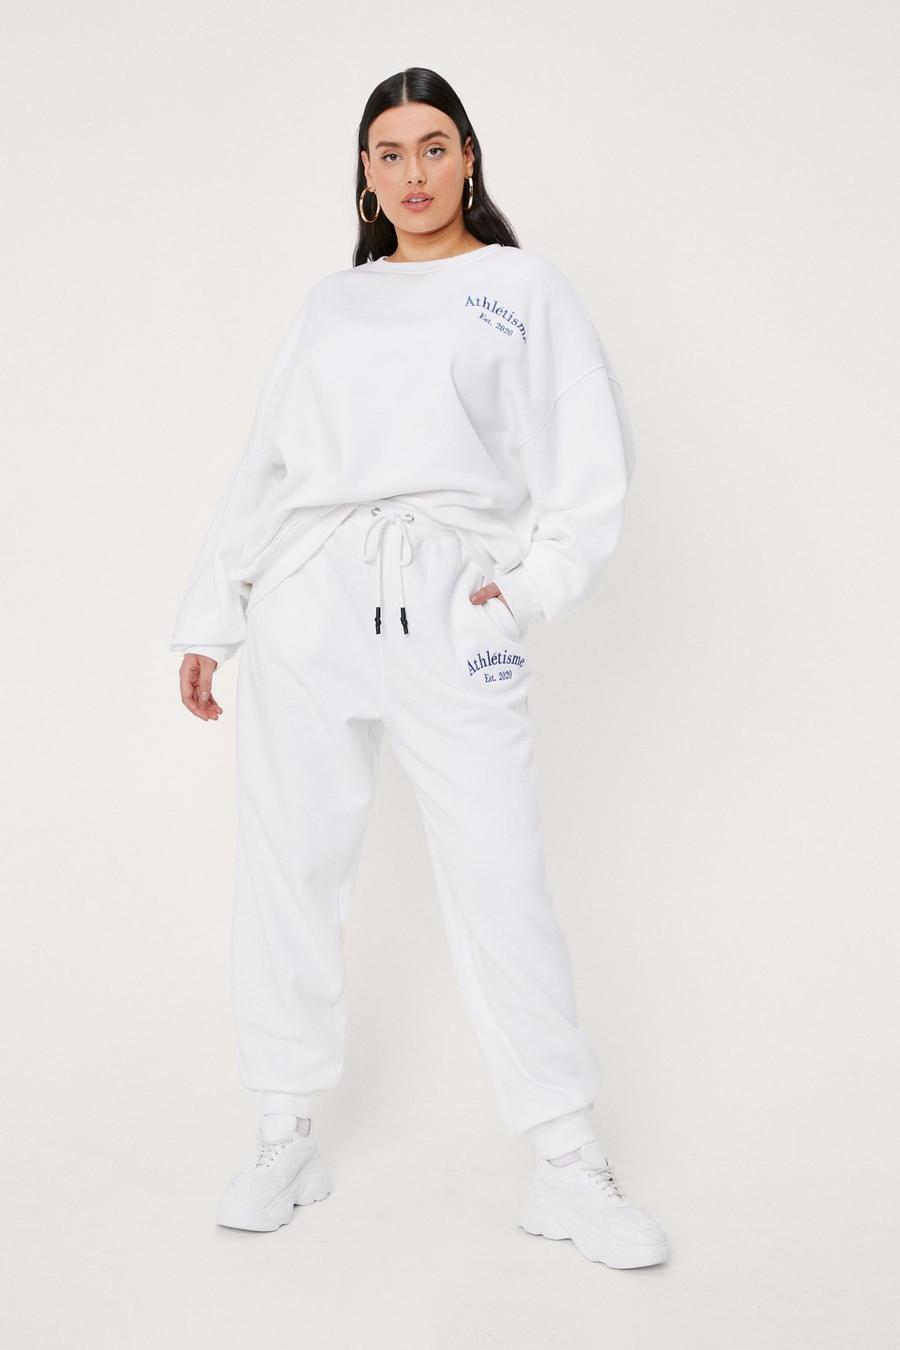 Plus Size Athletisme Embroidered Joggers